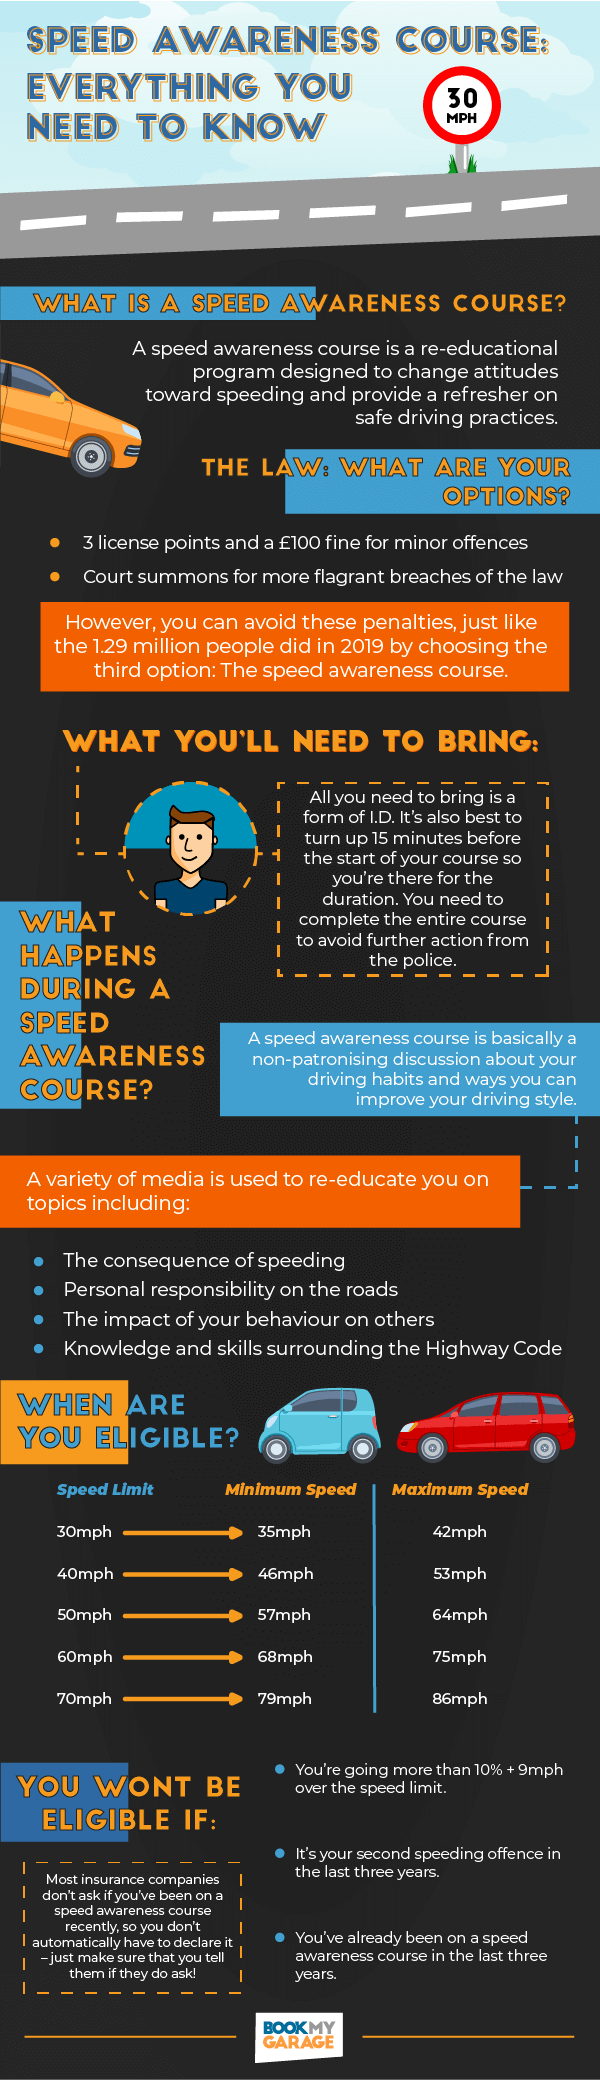 Speed Awareness Course Infographic